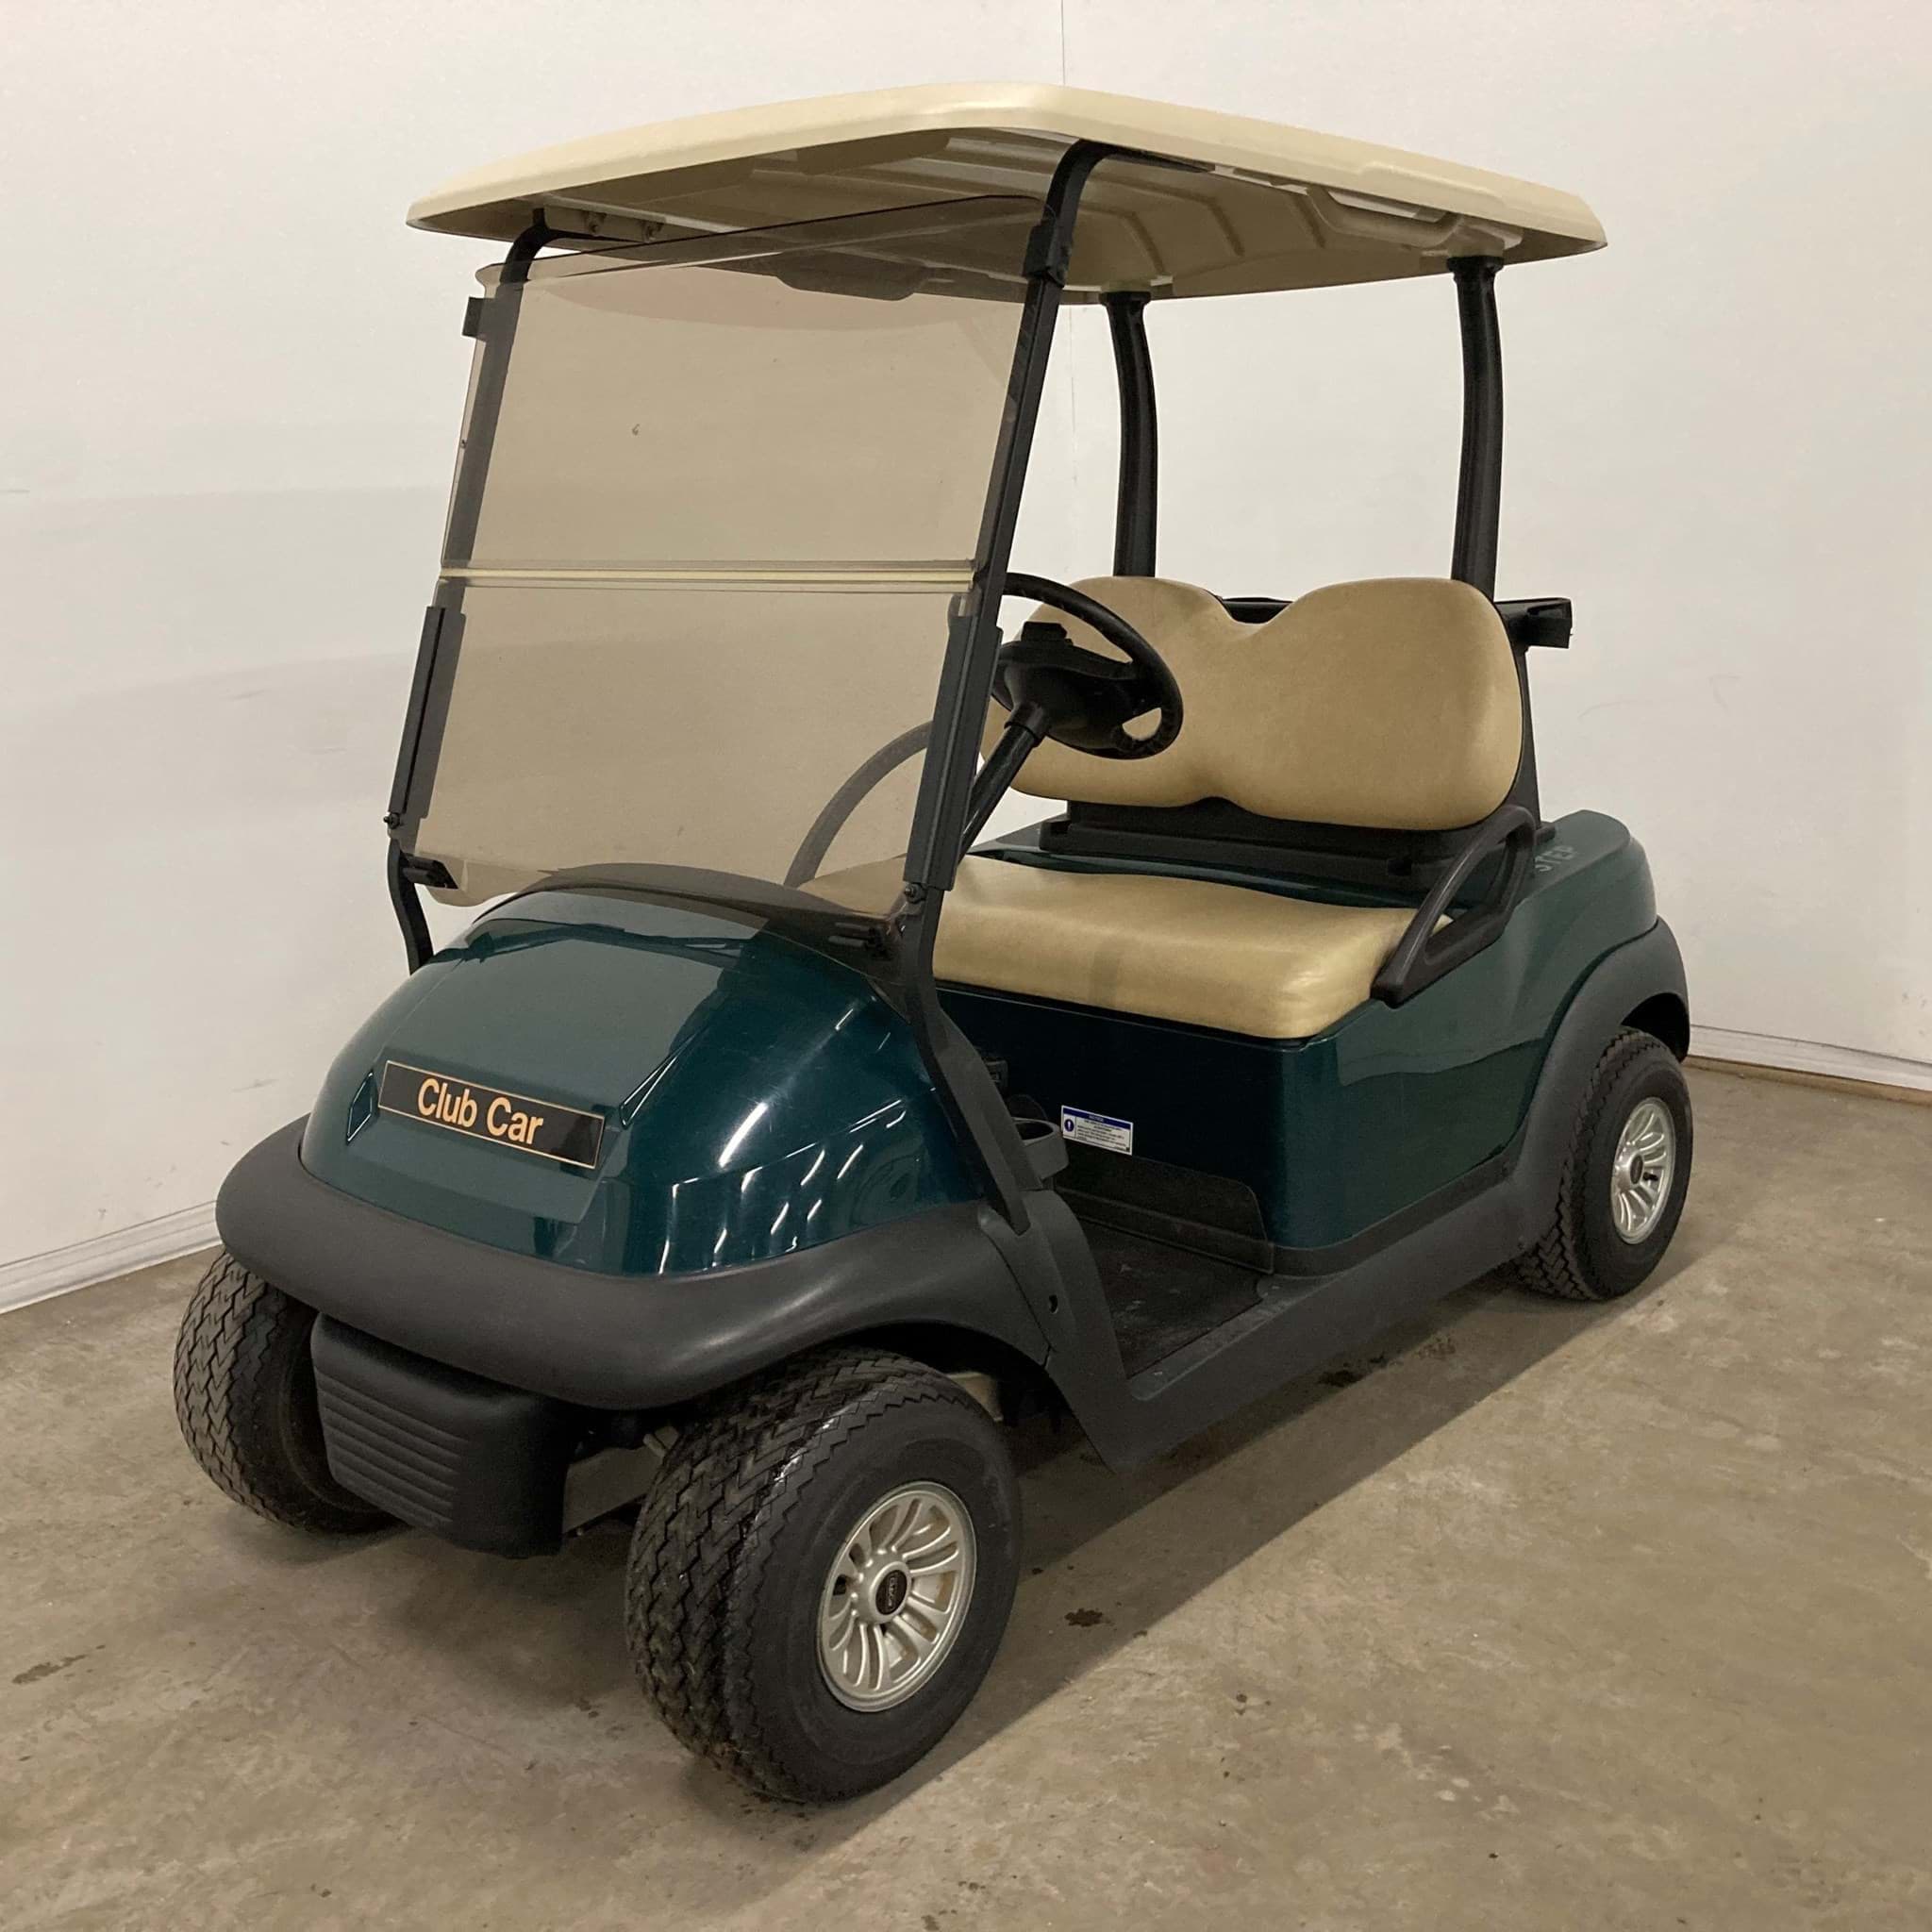 Picture of Trade - 2019 - Electric - Club Car - Precedent - 2 seater - Green